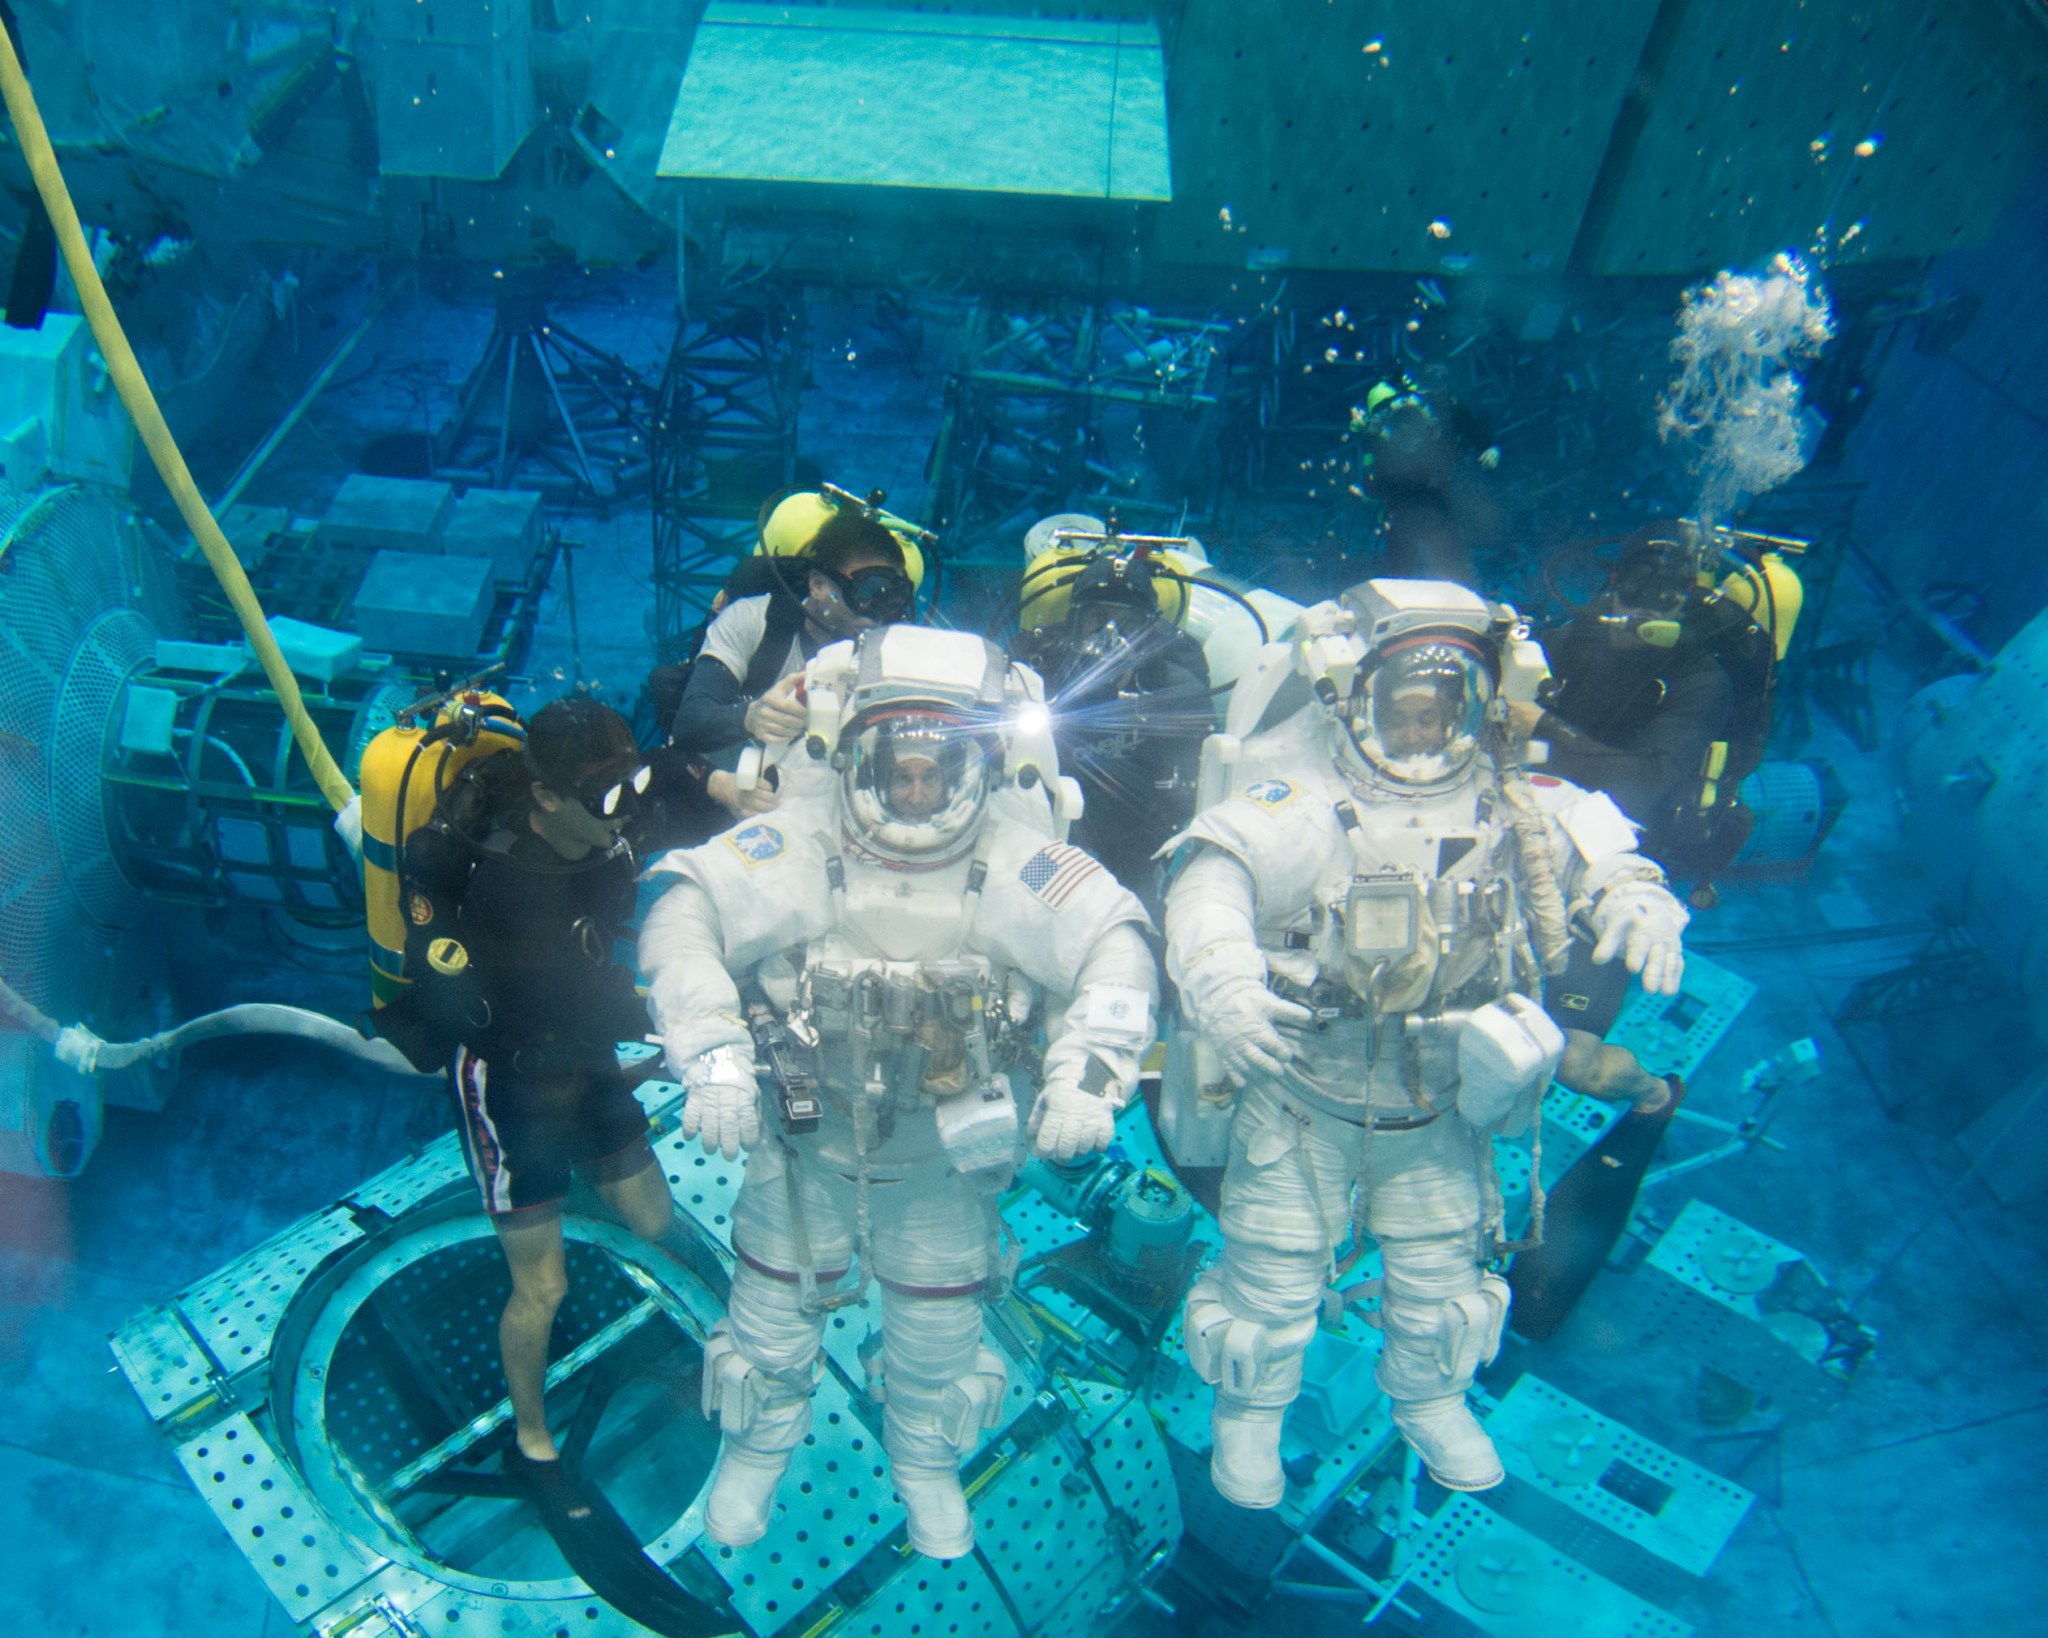 Two astronauts train for spacewalking while going underwater in the Neutral Buoyancy Laboratory